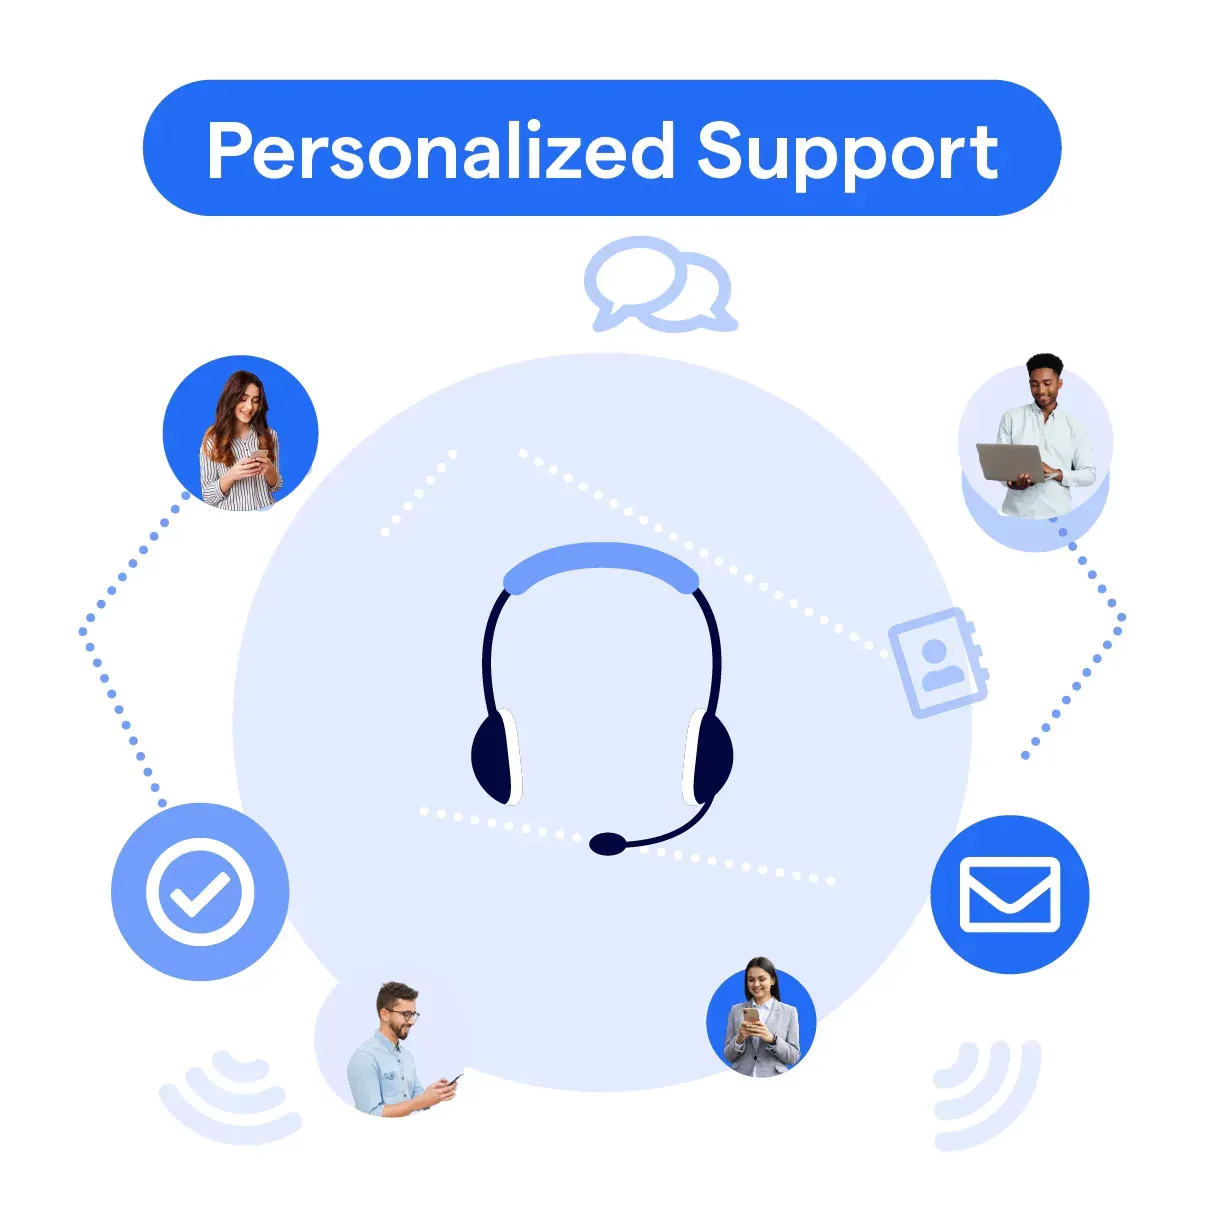 Personalized and tailored support